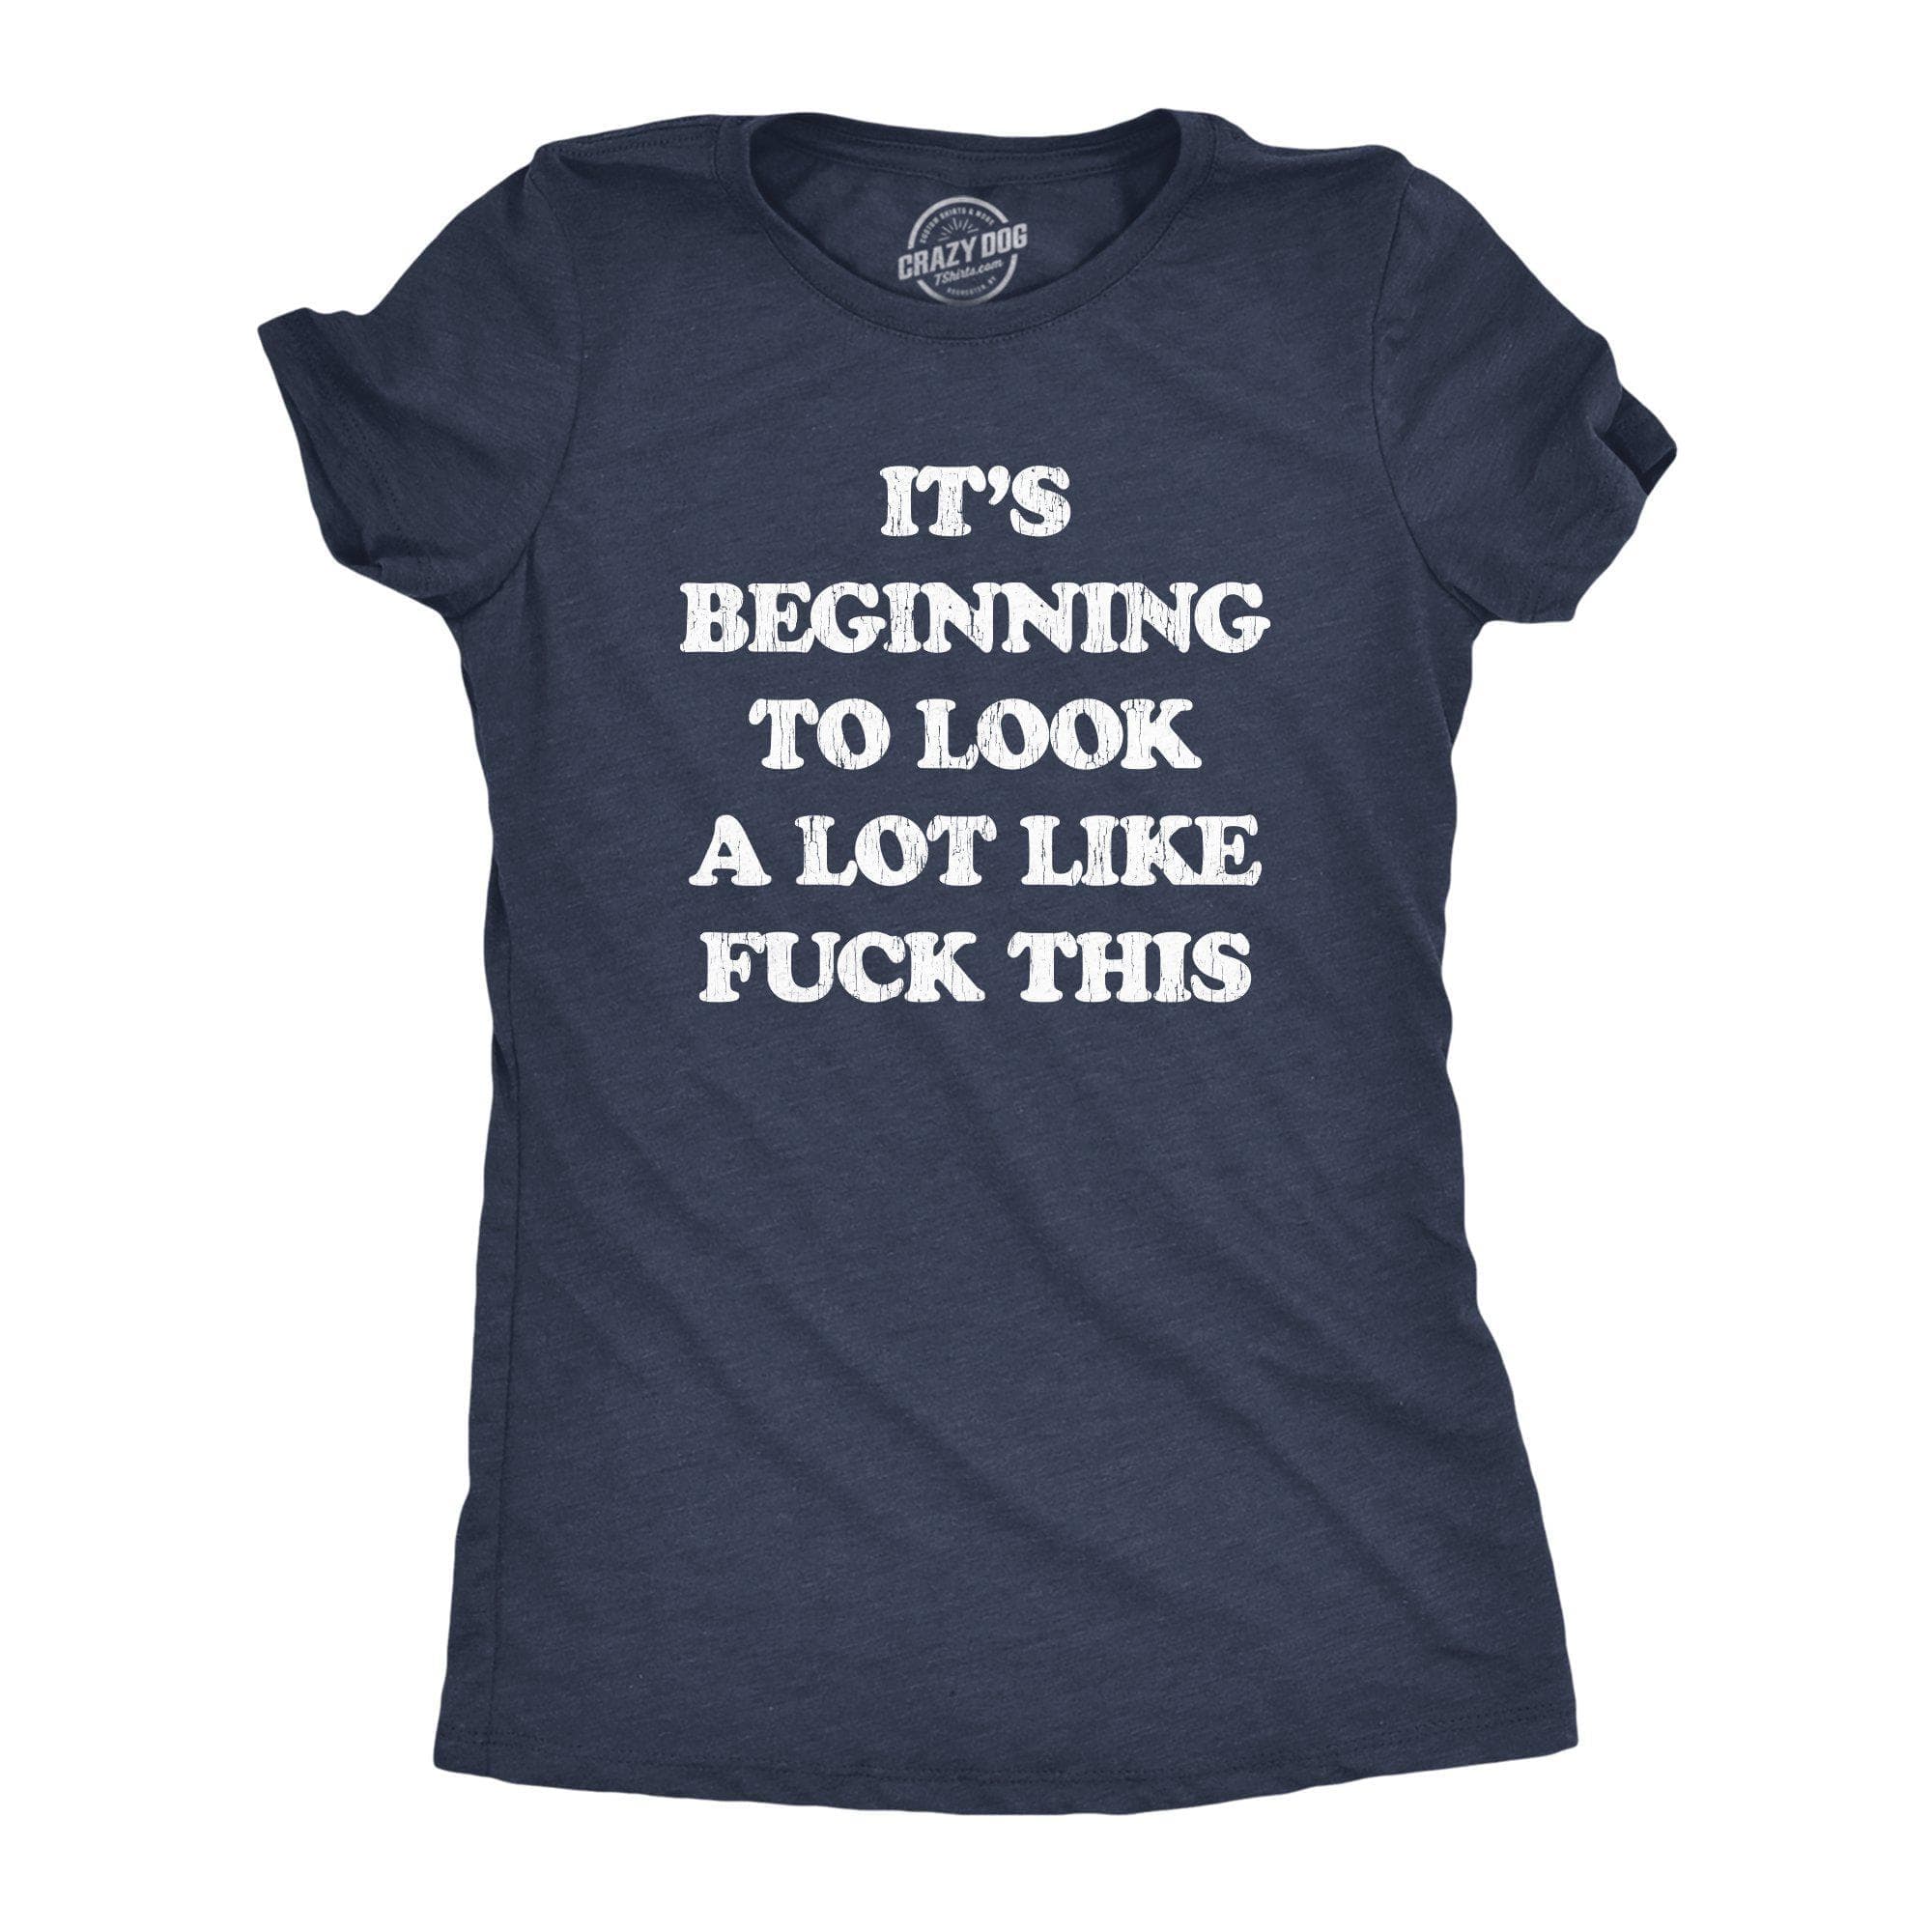 It's Beginning To Look A Lot Like Fuck This Women's Tshirt - Crazy Dog T-Shirts